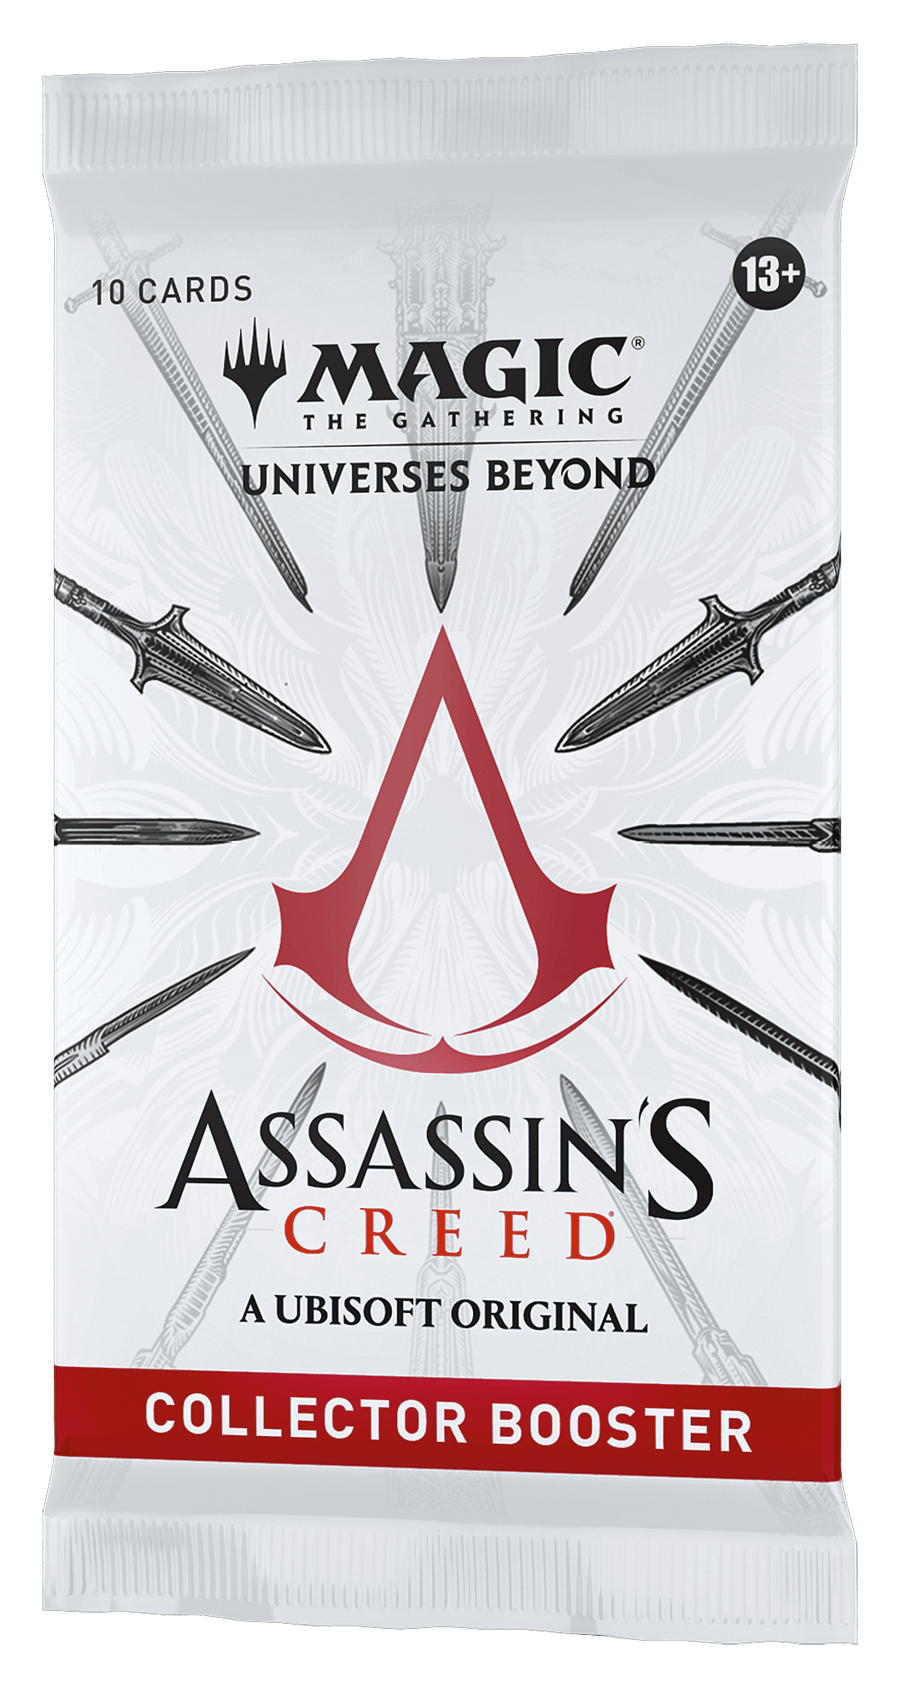 Magic: The Gathering Universes Beyond: Assassins Creed Collector Booster (Preorder)